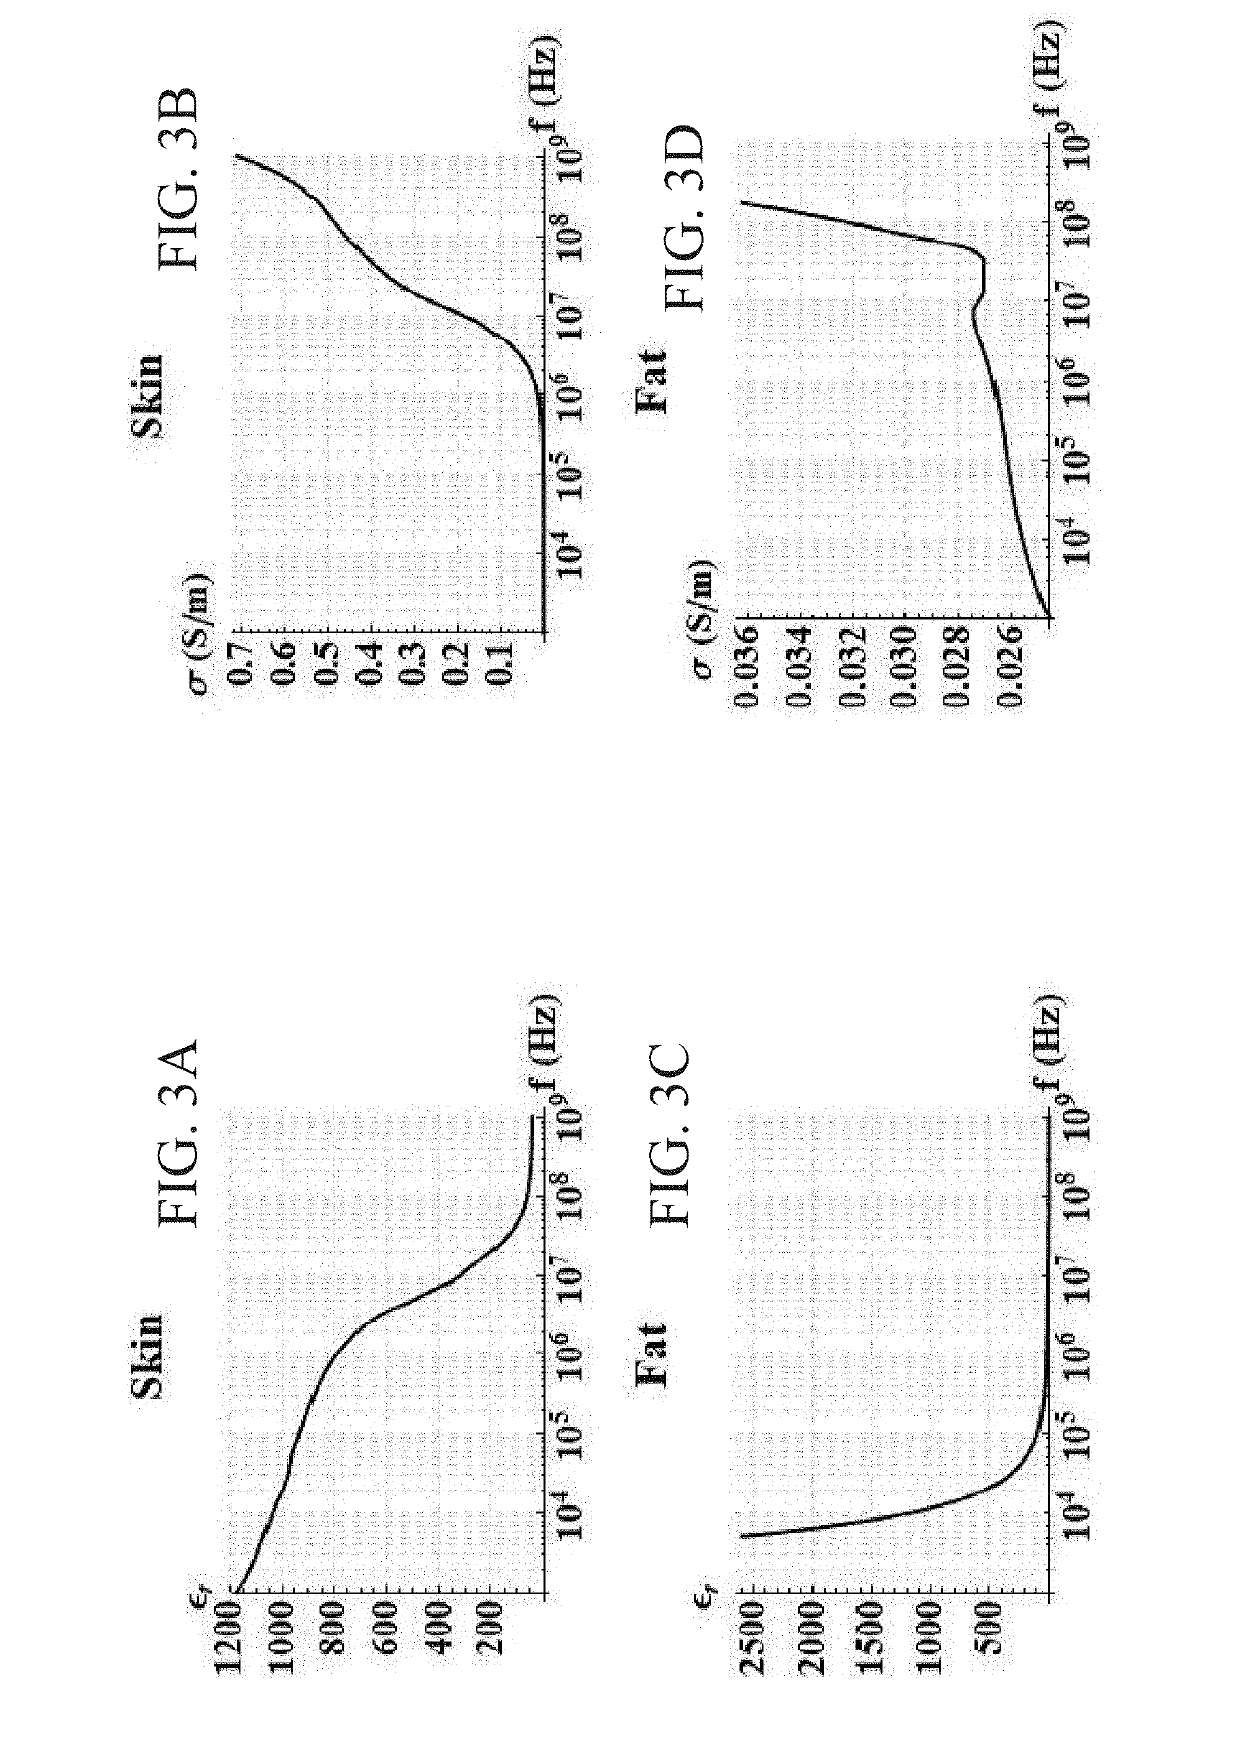 Device and methods for delivery of high frequency electrical pulses for non-thermal ablation